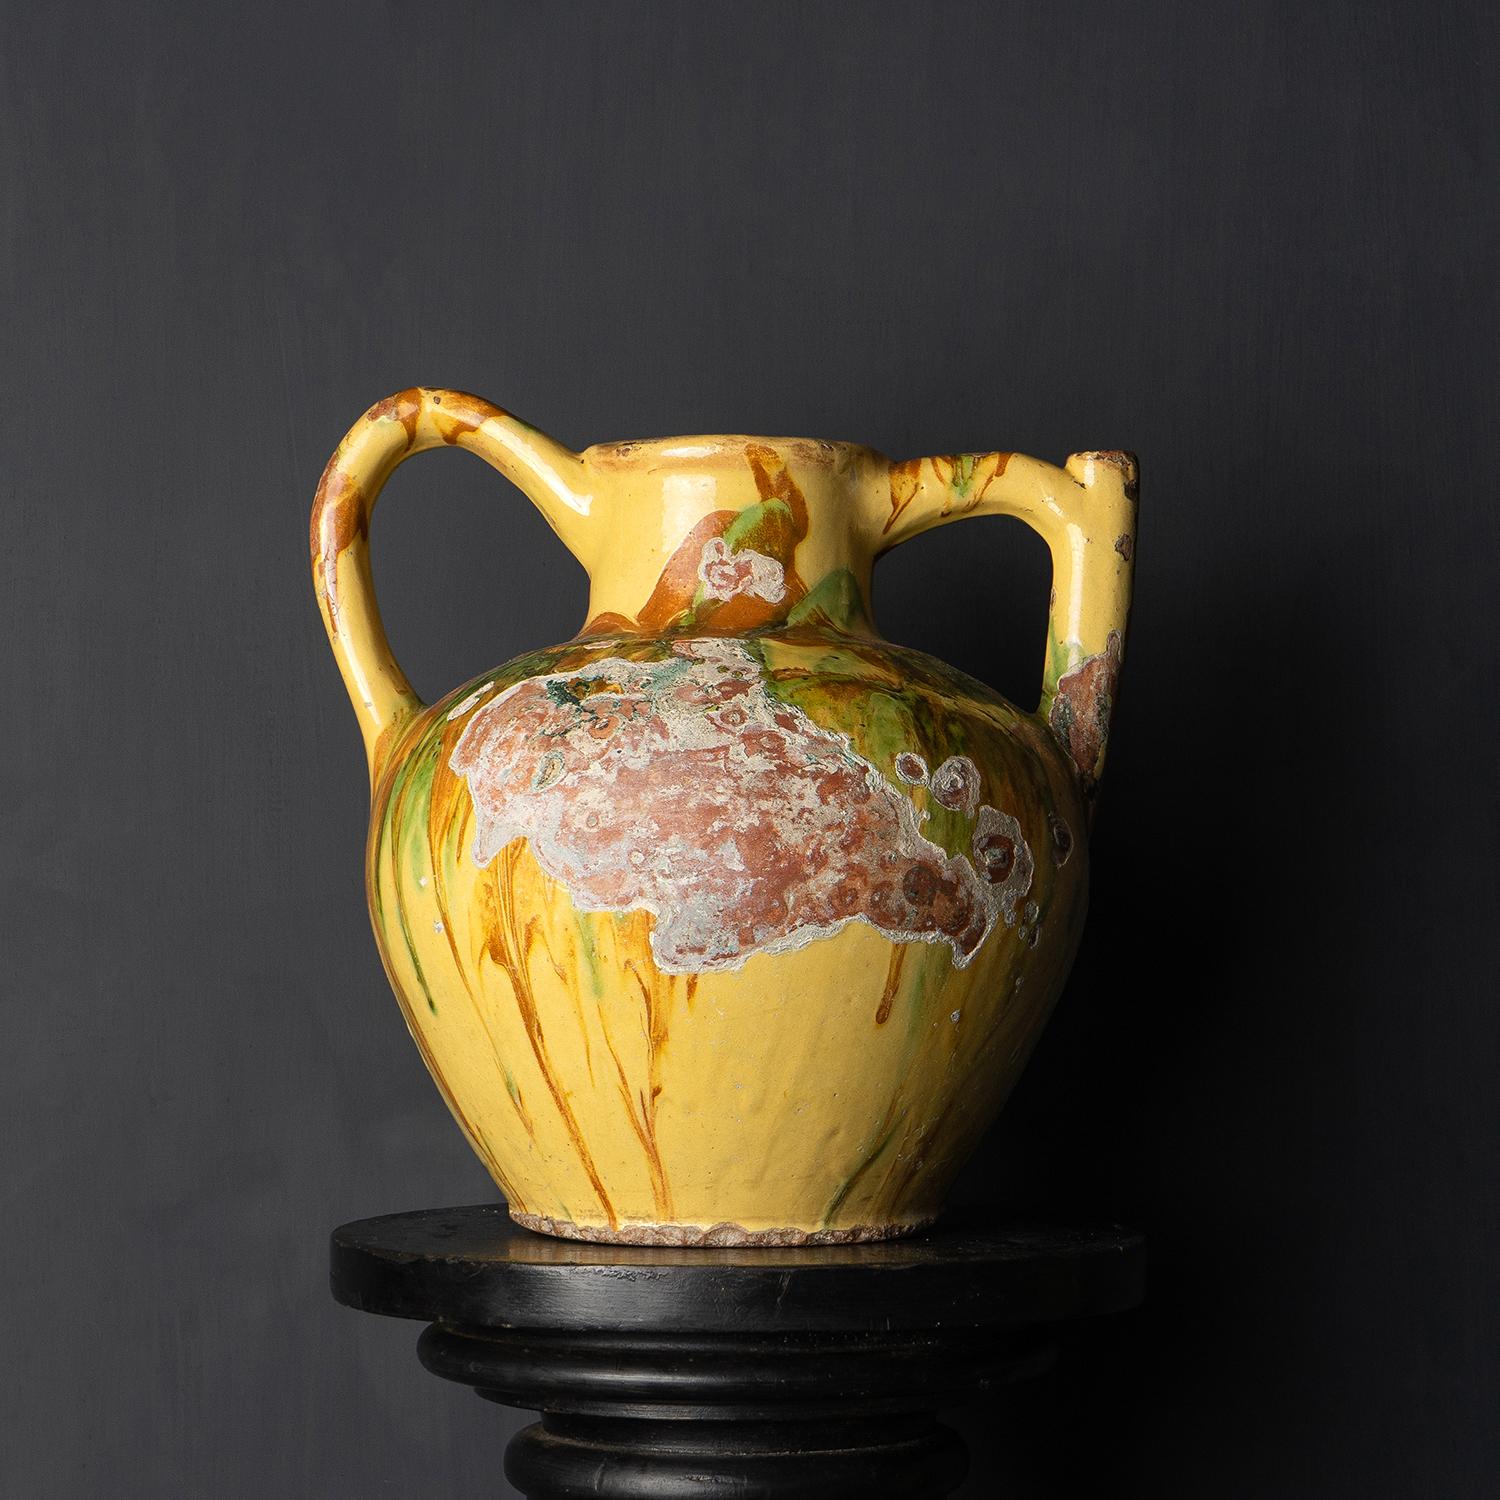 JASPE EARTHENWARE POTTERY WATER/WINE JUG OR GARGOULETTE

Gargoulettes were originally used to pour water or wine at the table.

Hugely decorative form, colouration and wear.

Marbled greens browns and yellow glaze.

The pot is structurally sound.